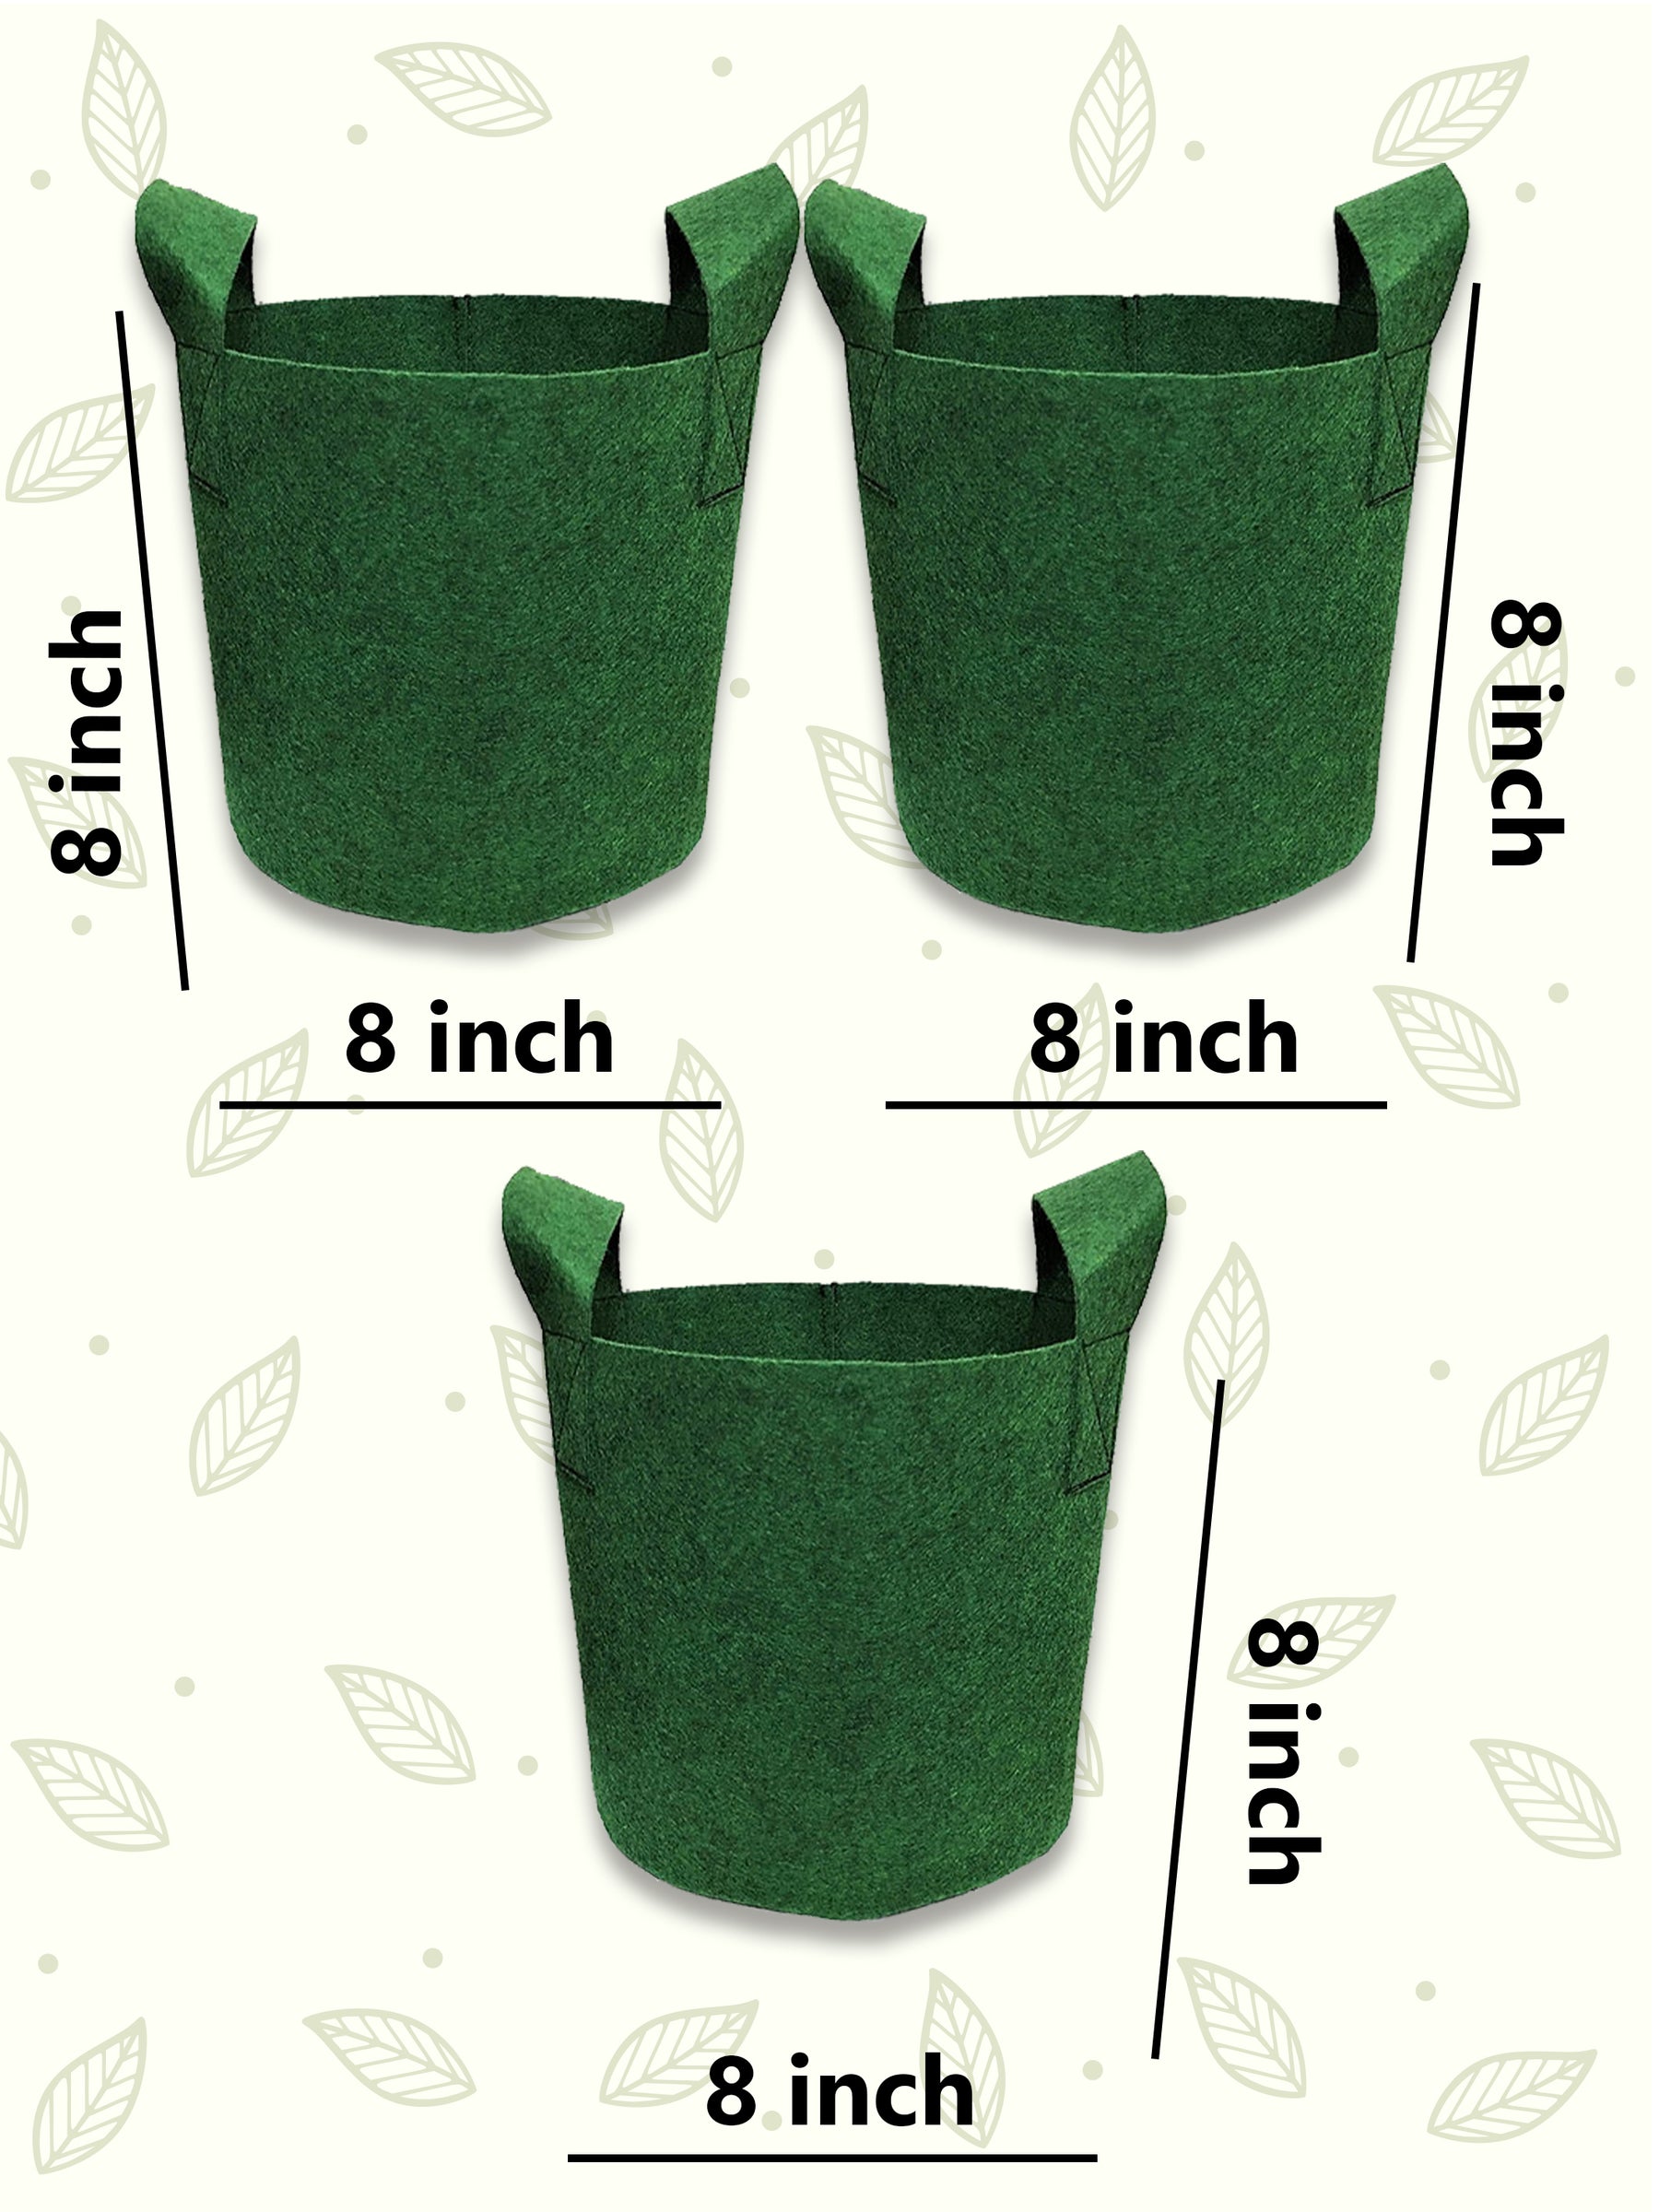 Geo Fabric Grow Bags 400 GSM - (Set of 3) - 8x8 inches